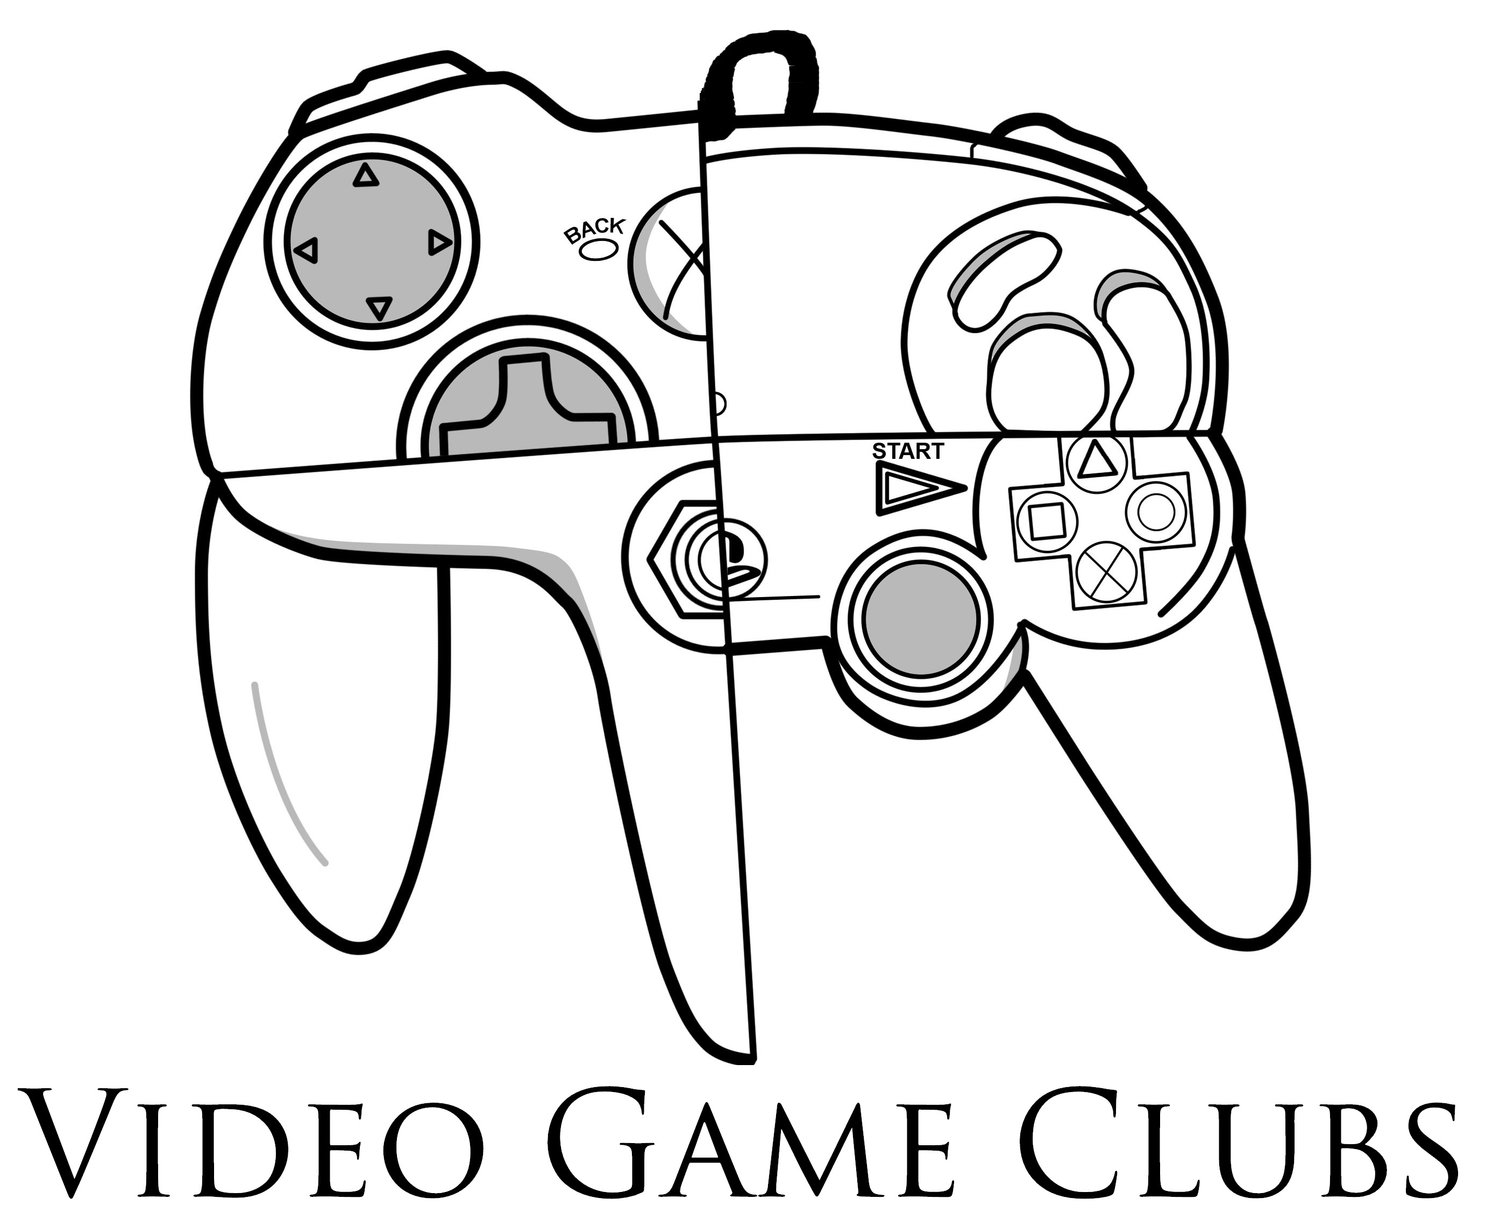 Video Game Clubs